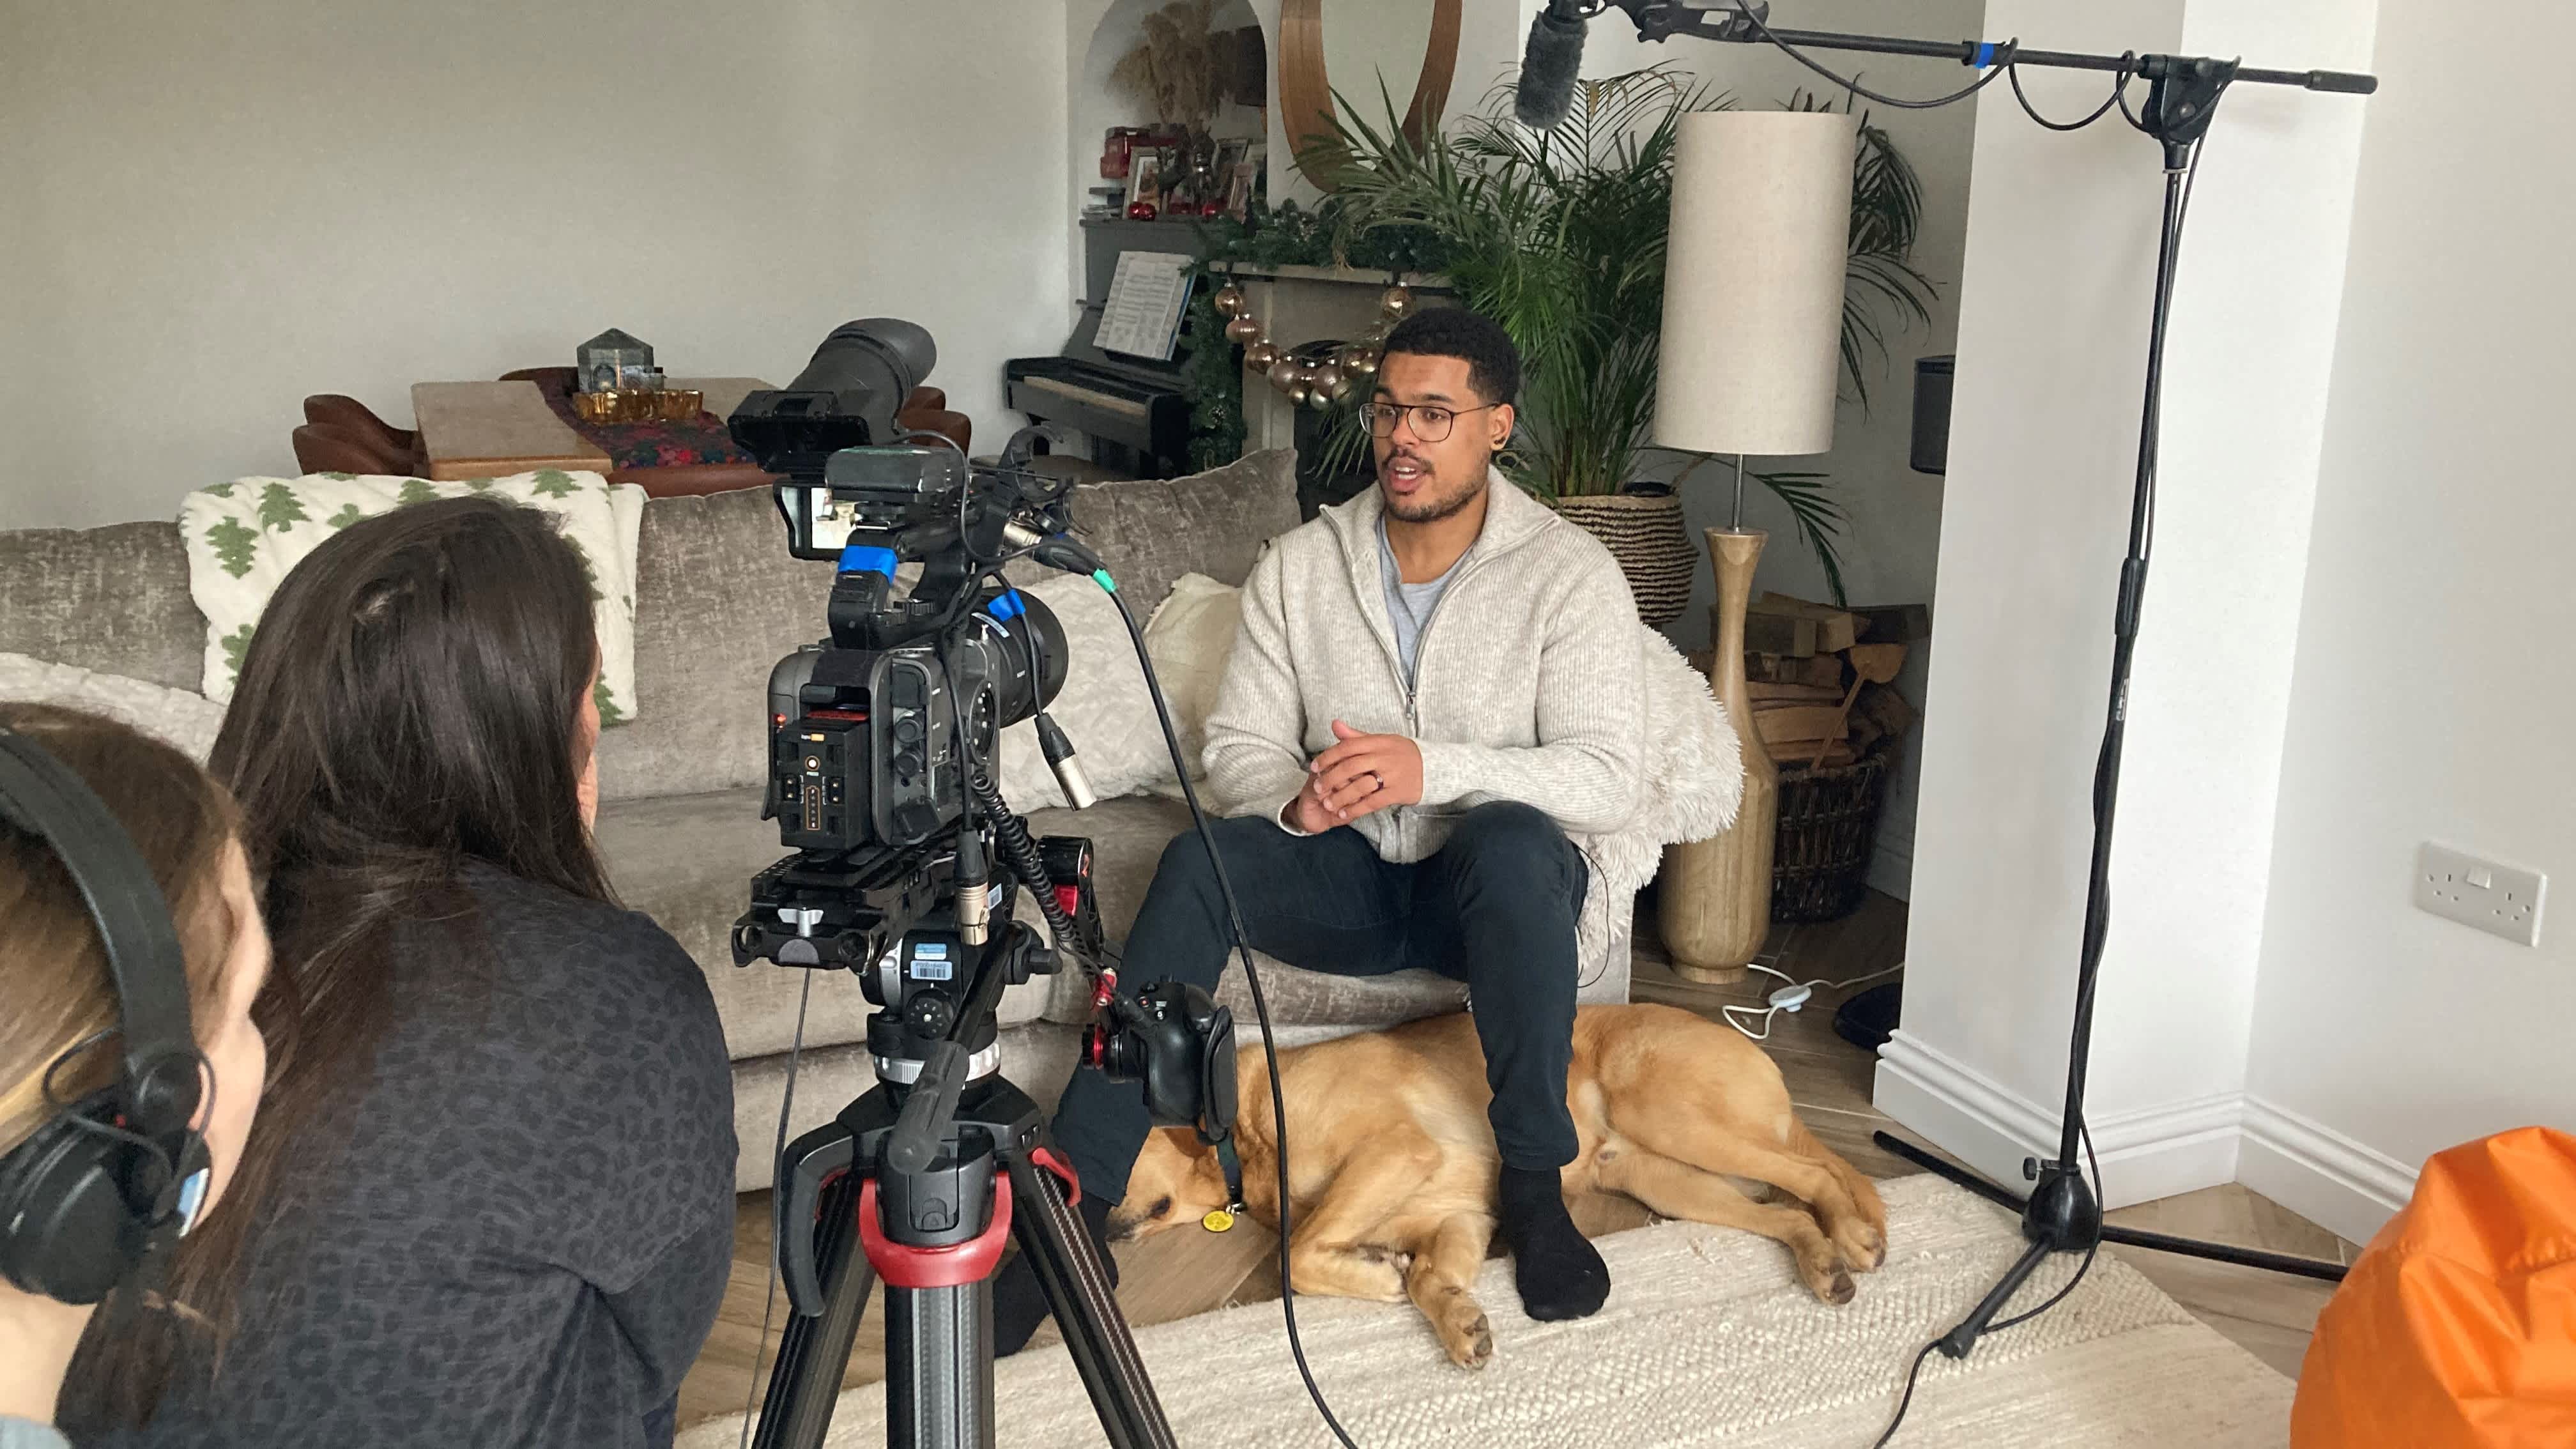 Guide dog owner Devante sits on a grey sofa at home being filmed for BBC Lifeline appeal. His golden guide dog lays at his feet as Devante talks to the camera and two crew members.